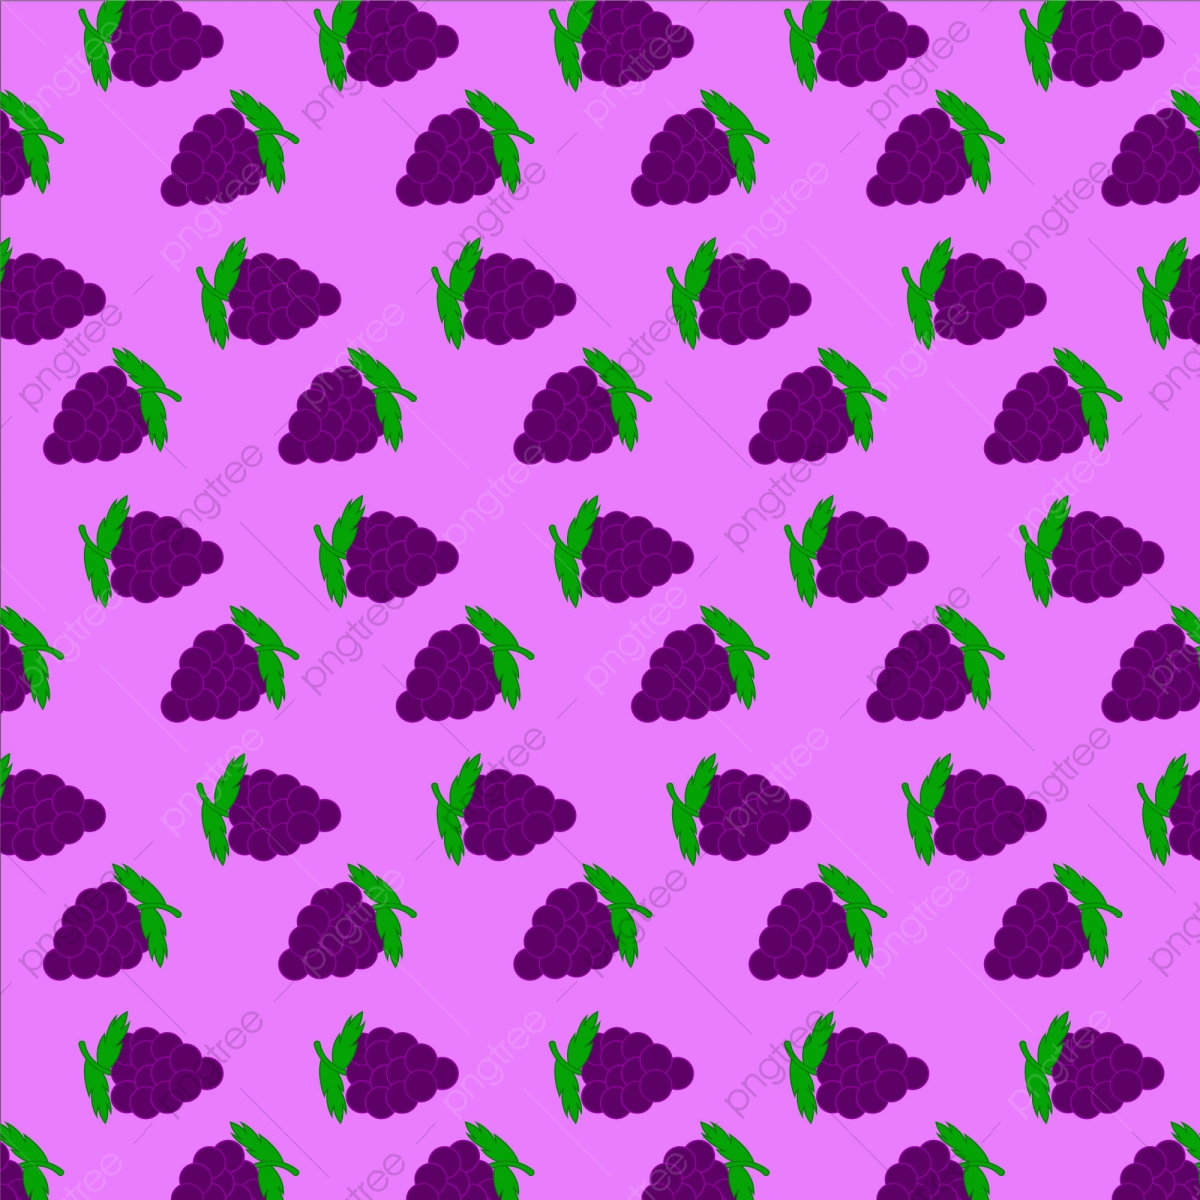 Fruity Backgrounds